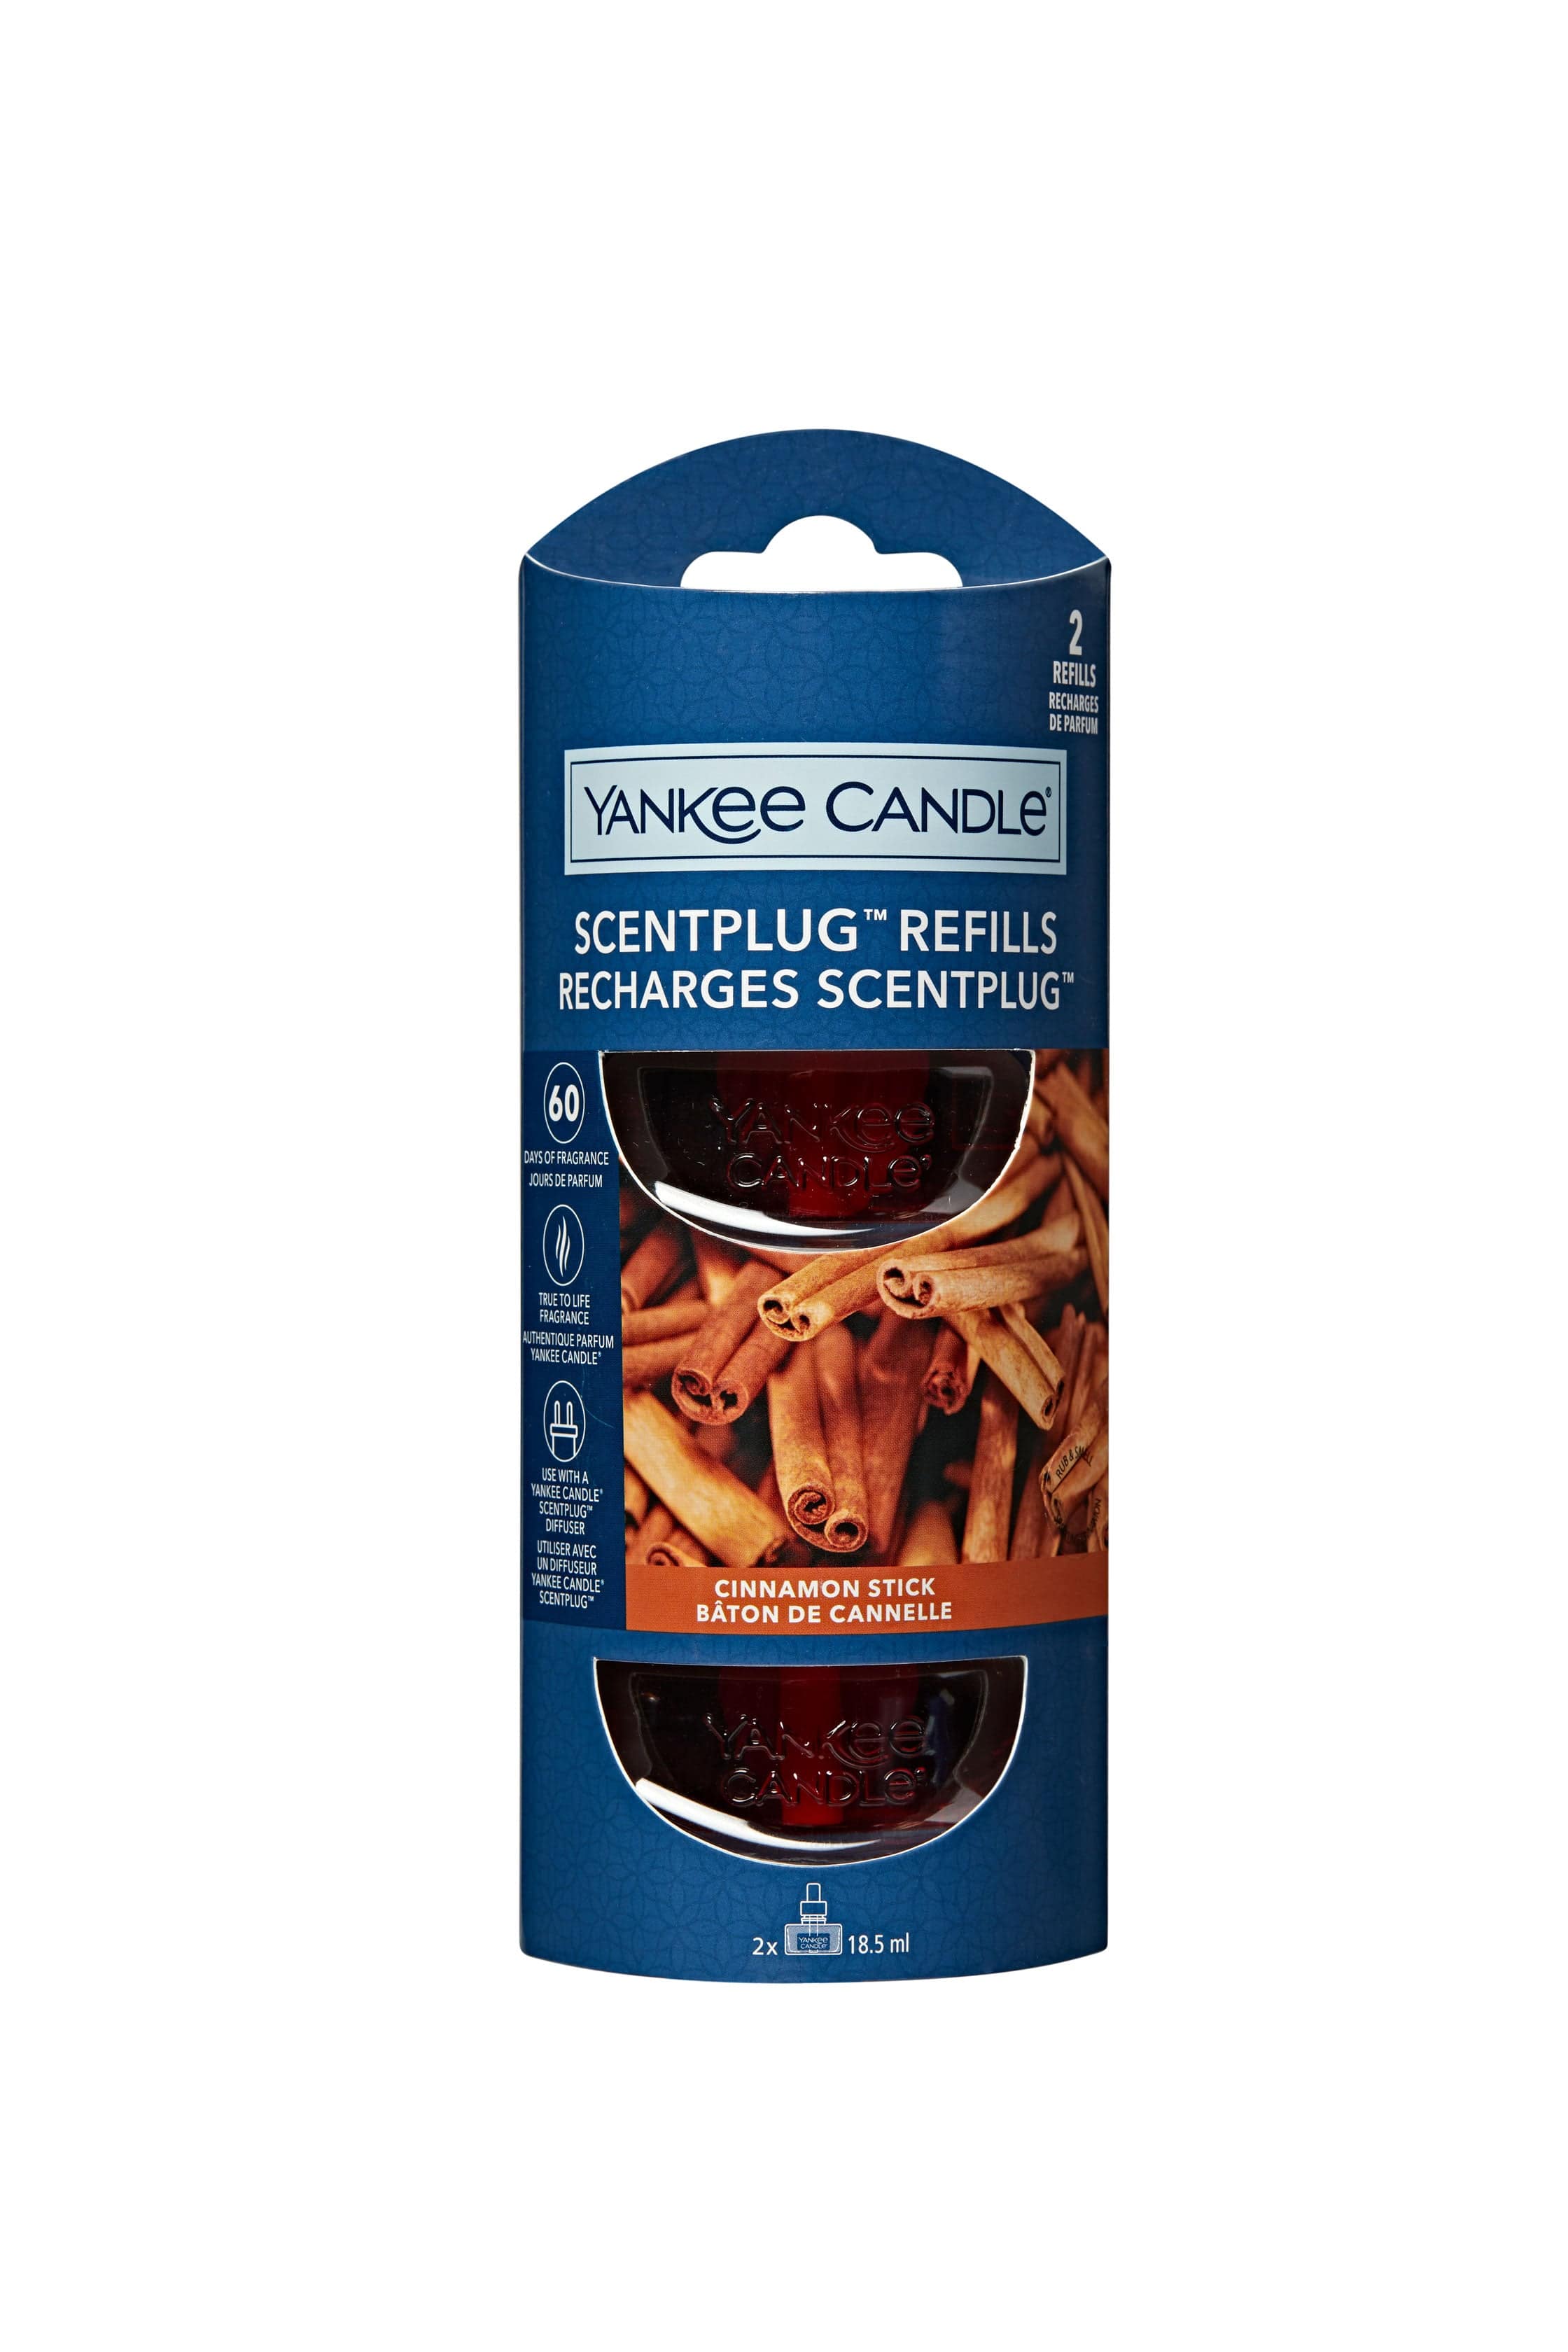 Yankee Candle Plug In Refill Yankee Candle Scentplug Refill Twin Pack - Cinnamon Stick